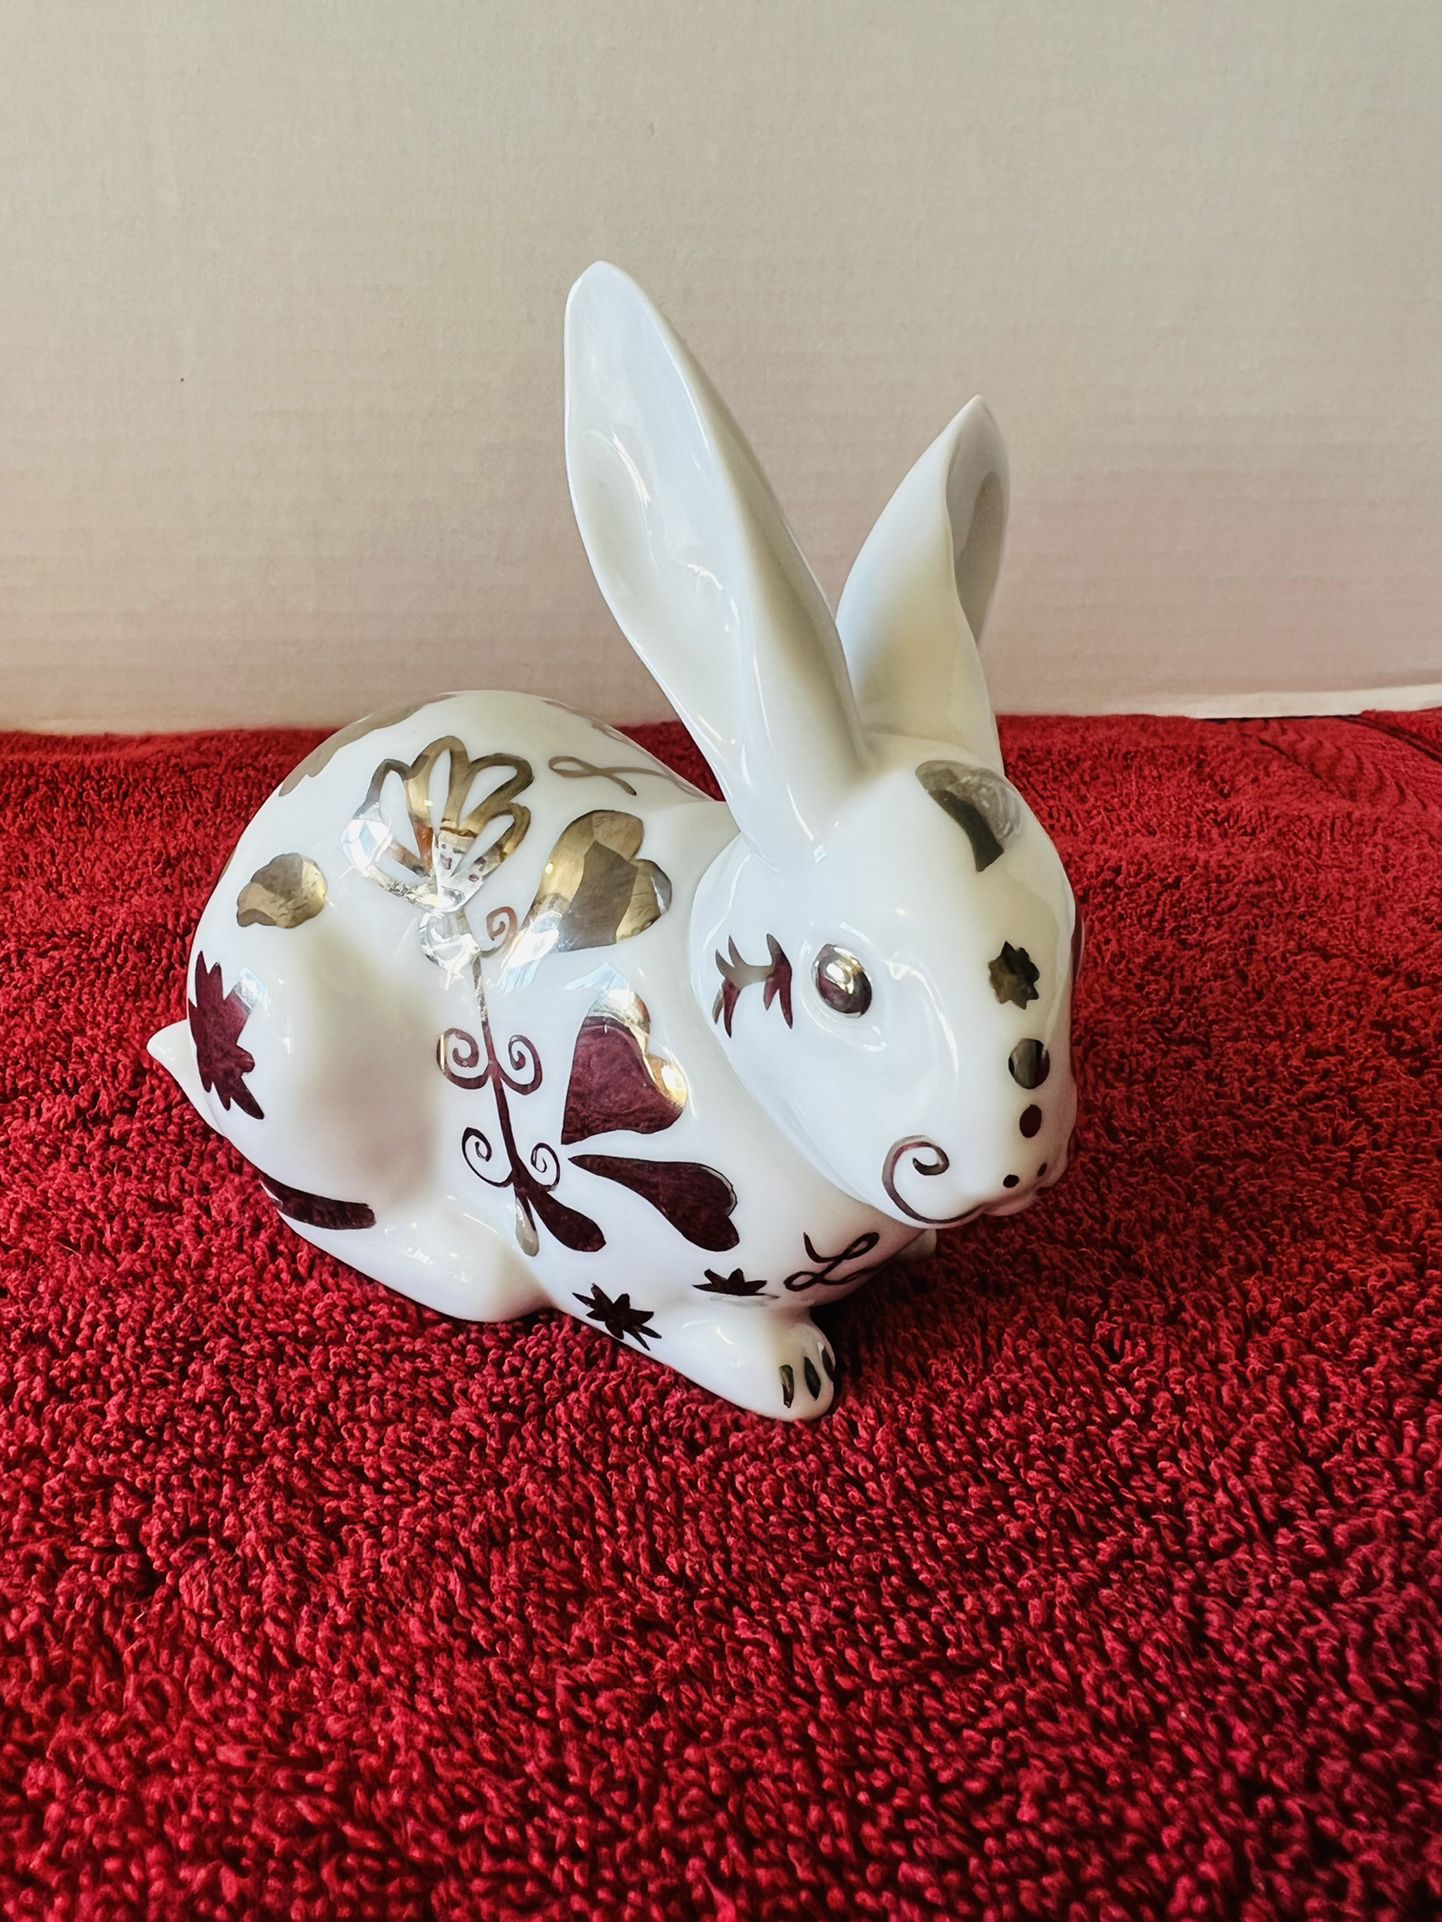 Lladro Attentive Bunny (Re-Deco) Retired Porcelain Figurines With Hand Painted Flowers And Designs